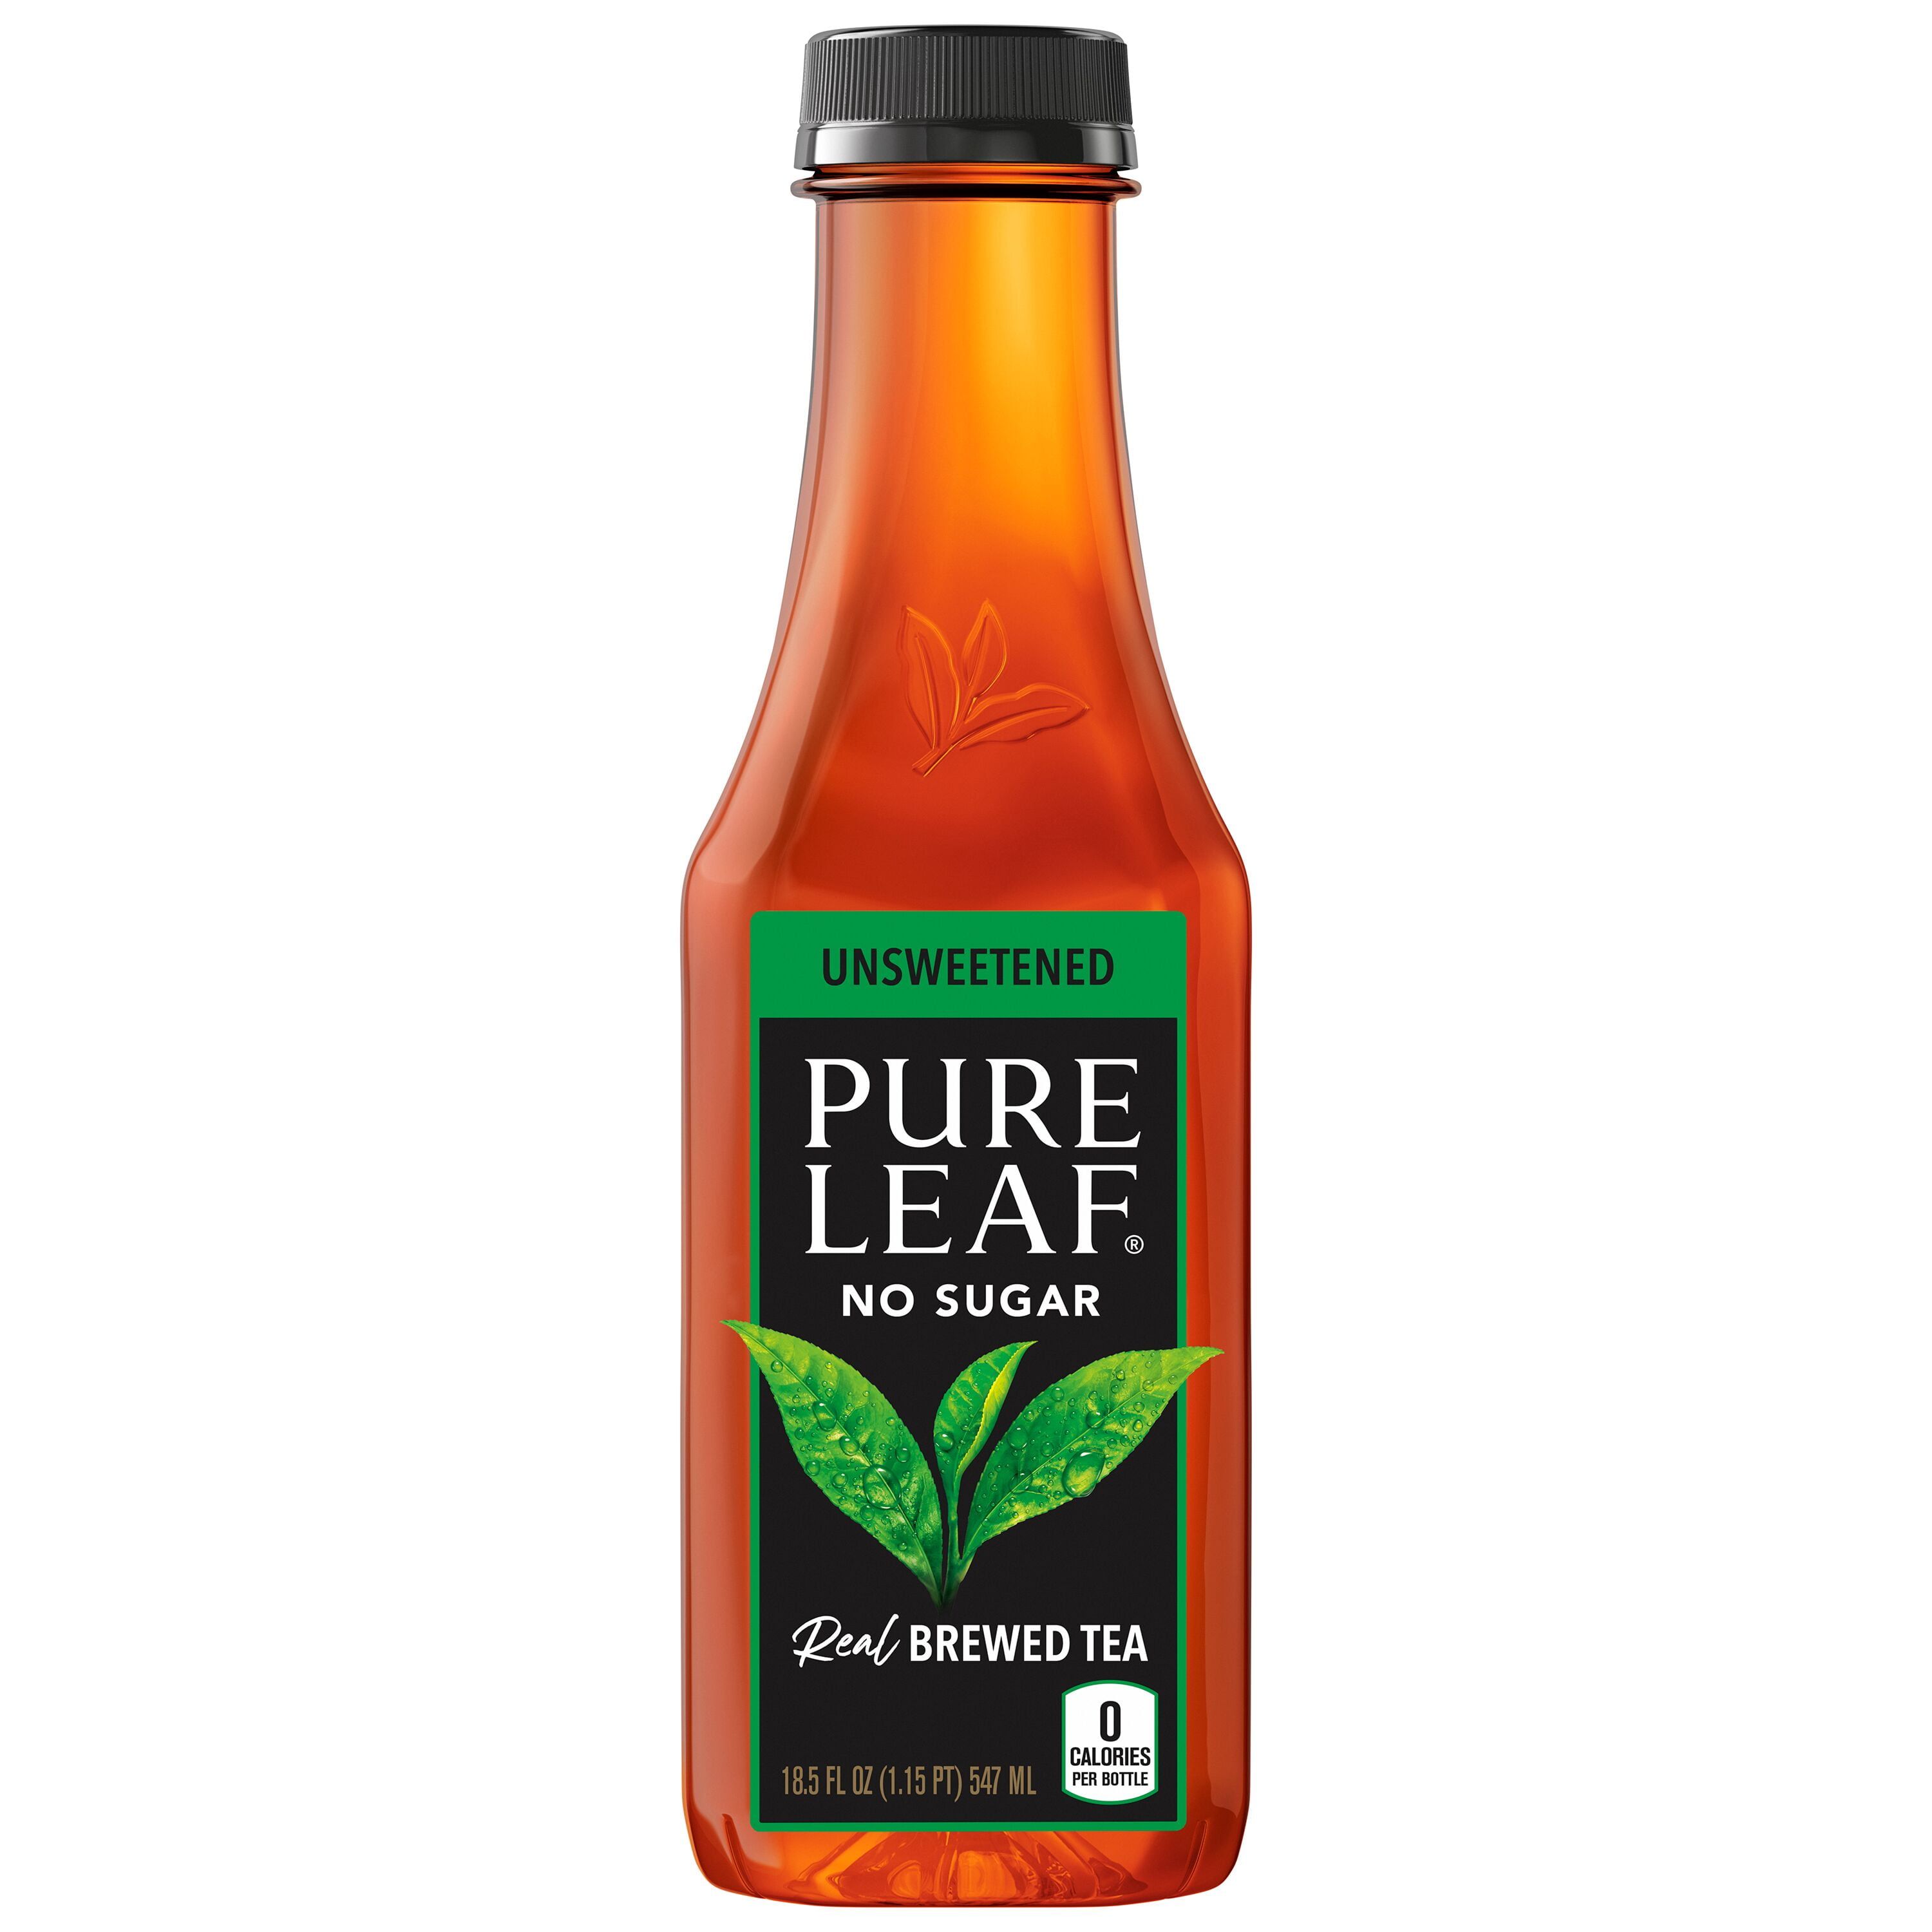 Pure Leaf - Pure Leaf, Brewed Tea, Real, Unsweetened (18 count)